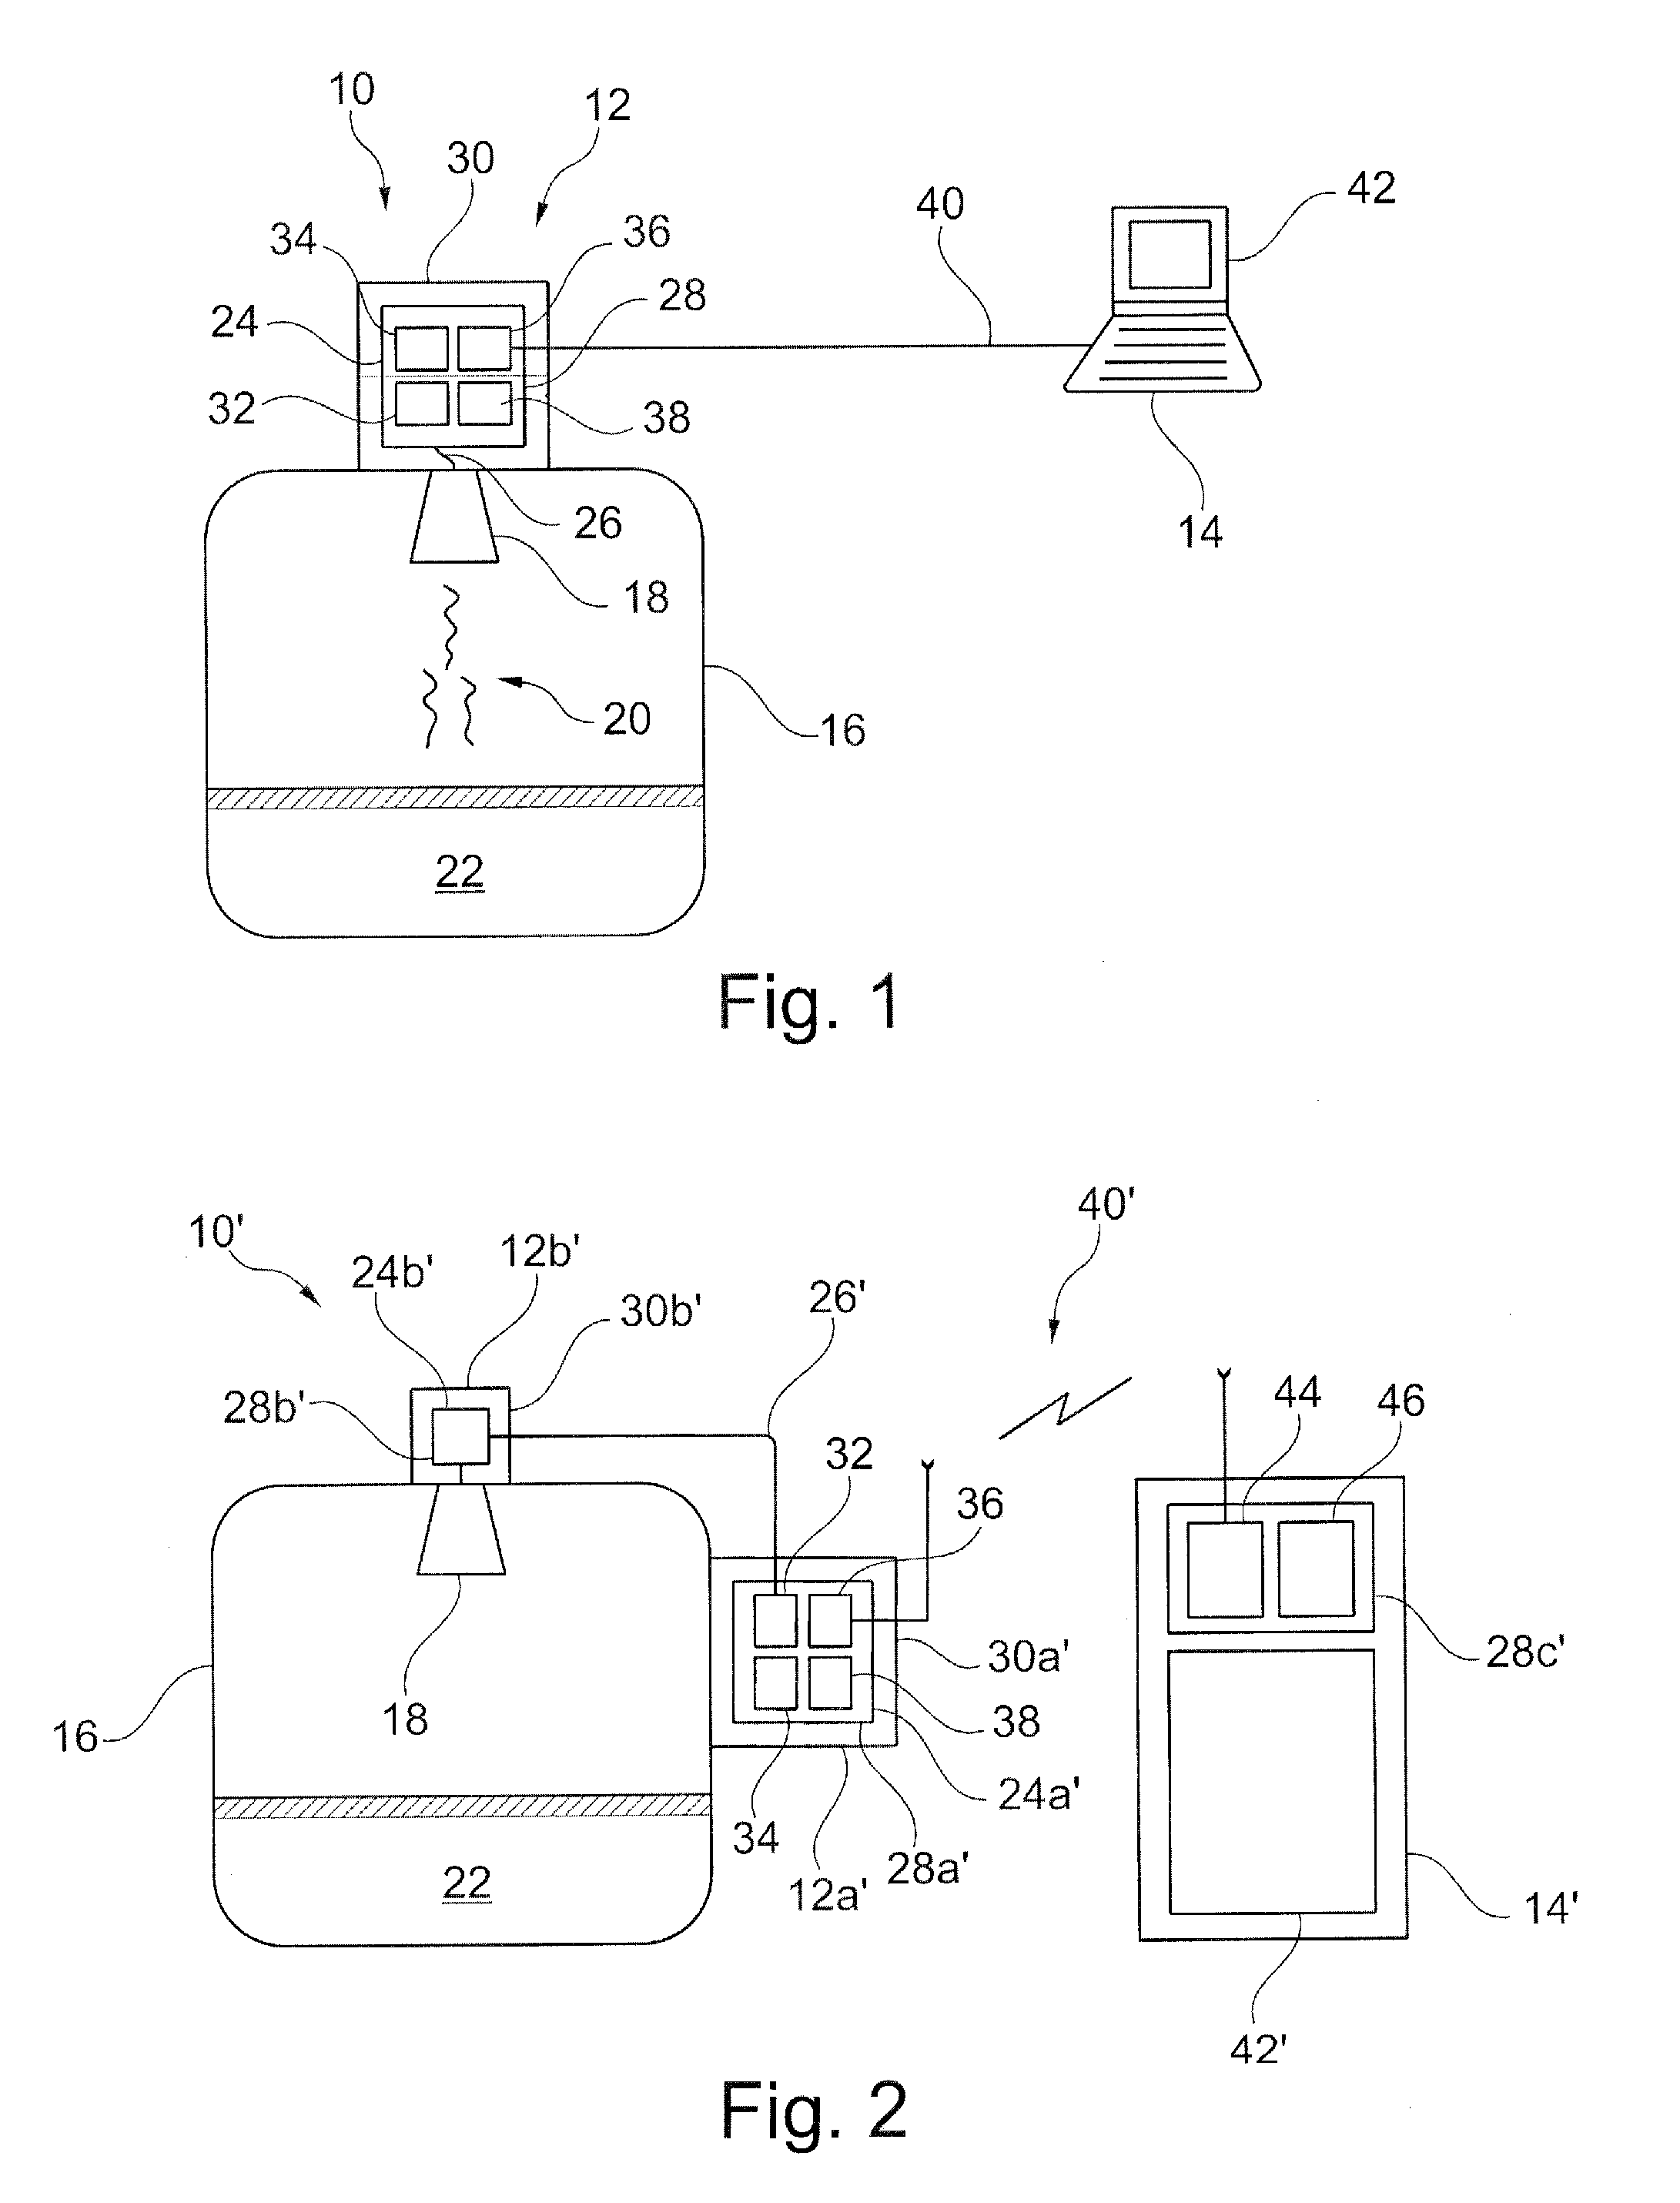 Control Module for a Field Device